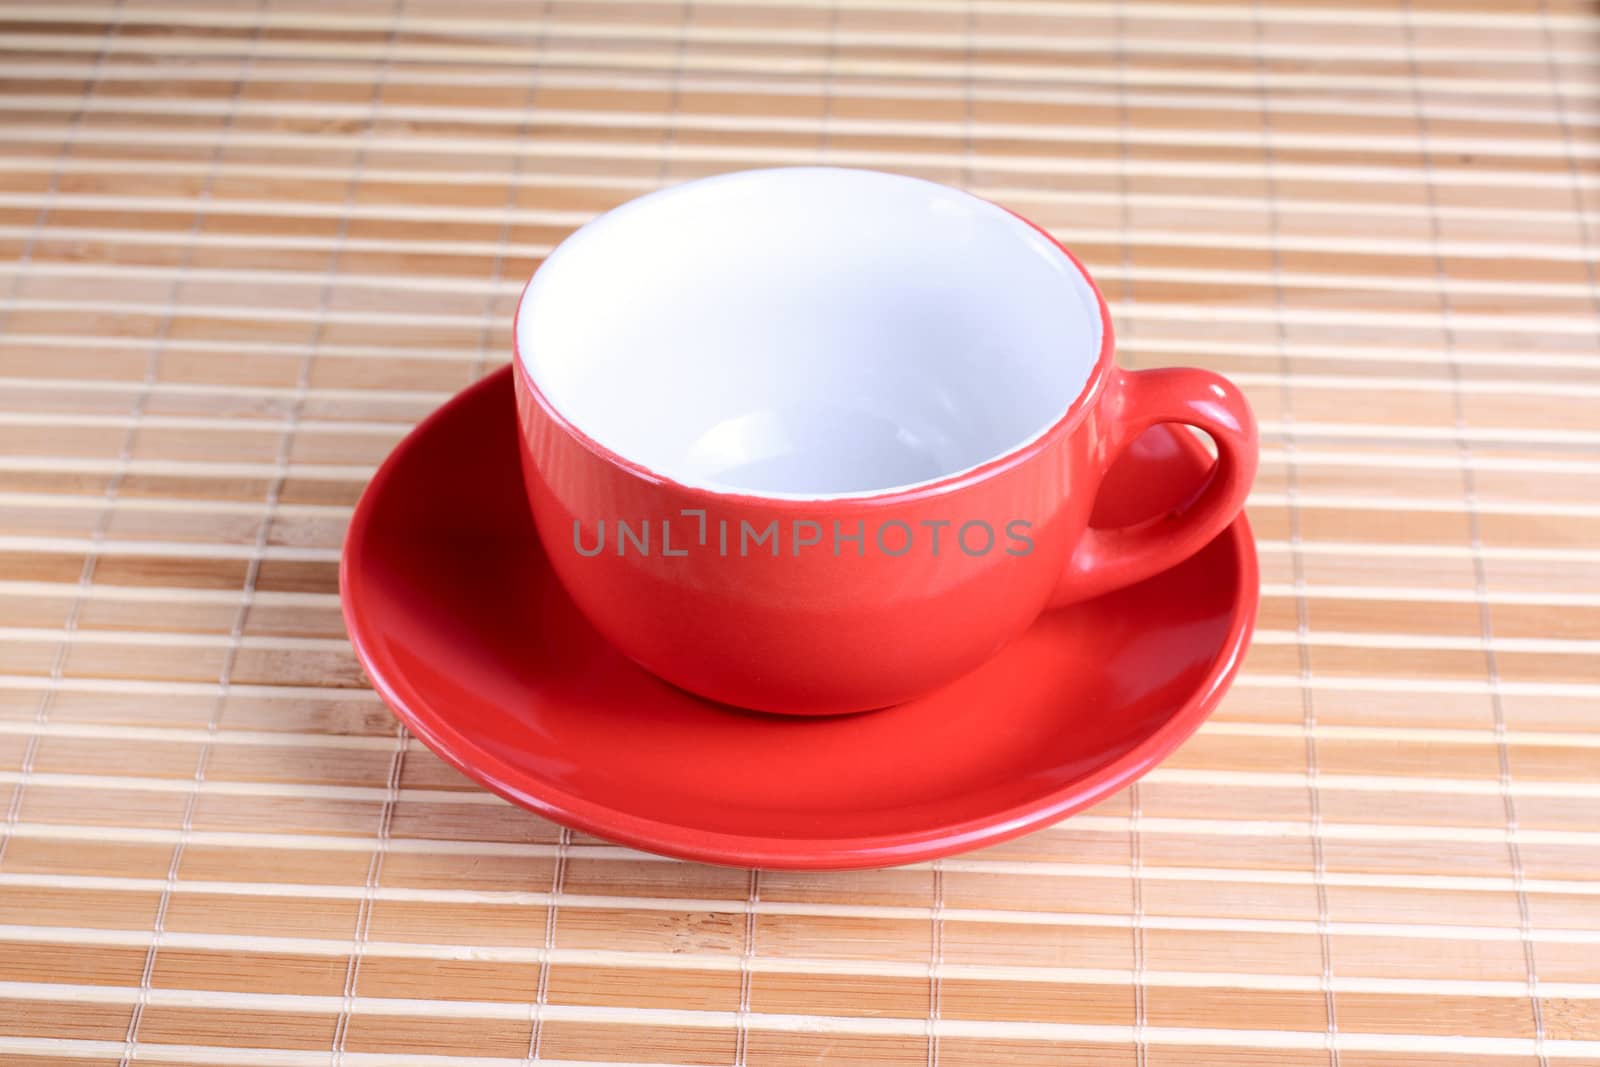 Empty red cup on the plate at the textured background